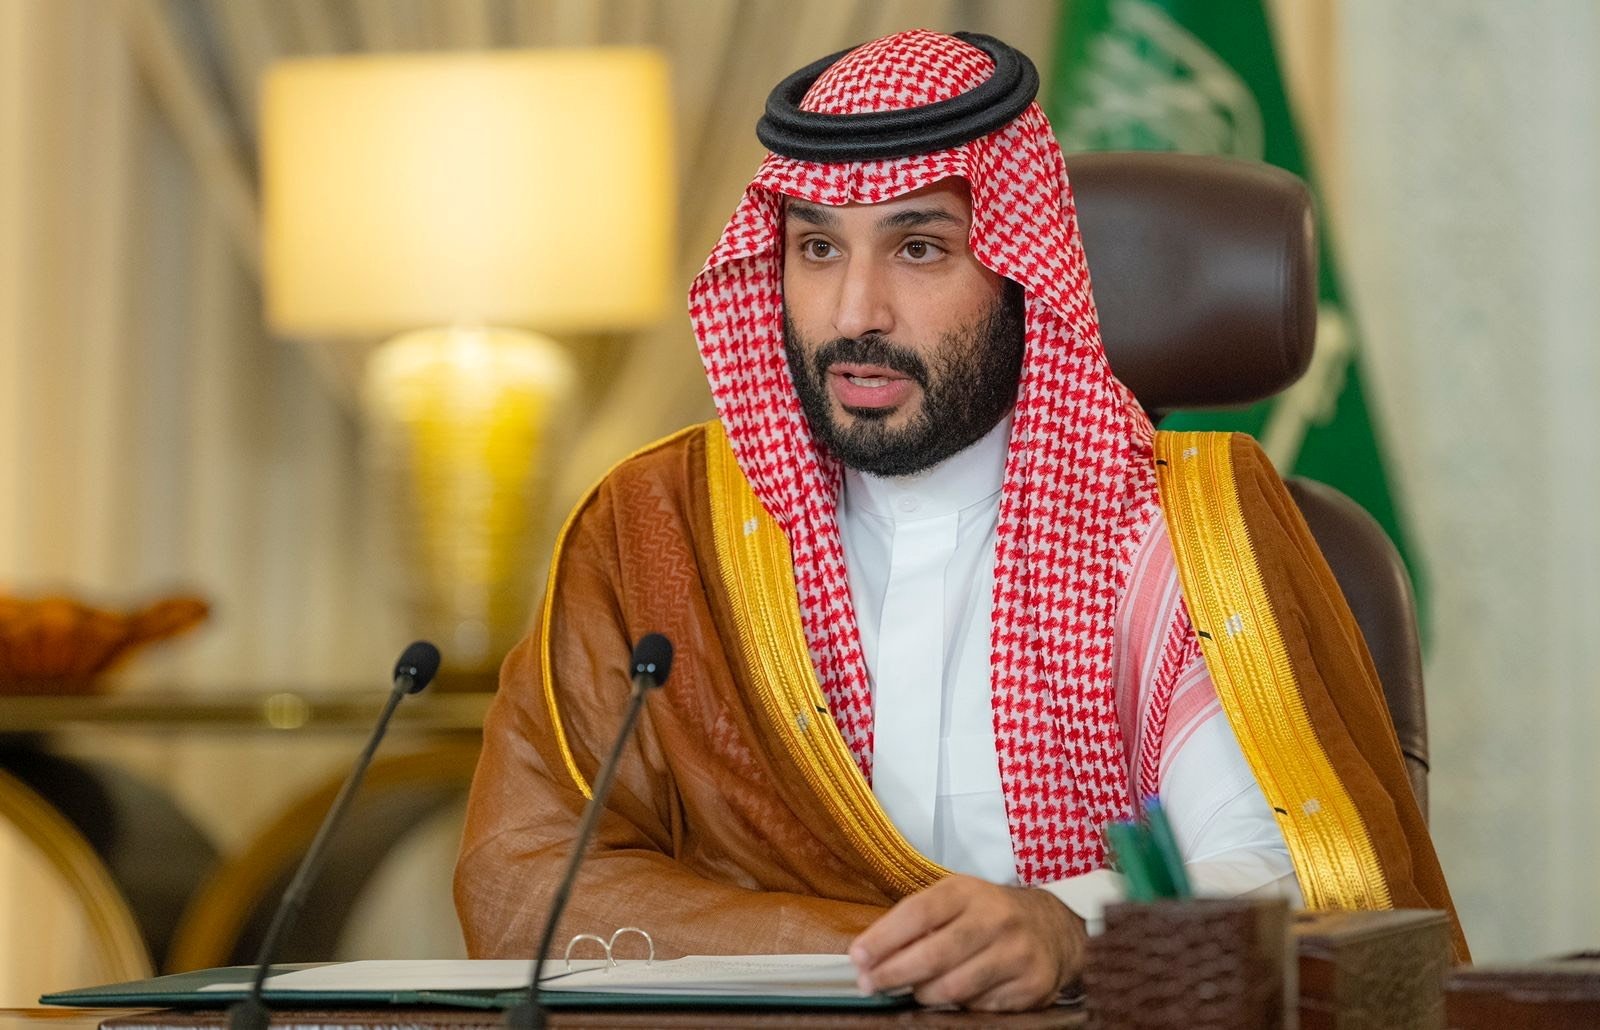 Saudi Crown Prince Mohammed bin Salman gives a speech from his office as he addresses the Saudi Green Initiative forum opening ceremony, in Riyadh, Saudi Arabia, Oct. 23, 2021. (Reuters Photo)